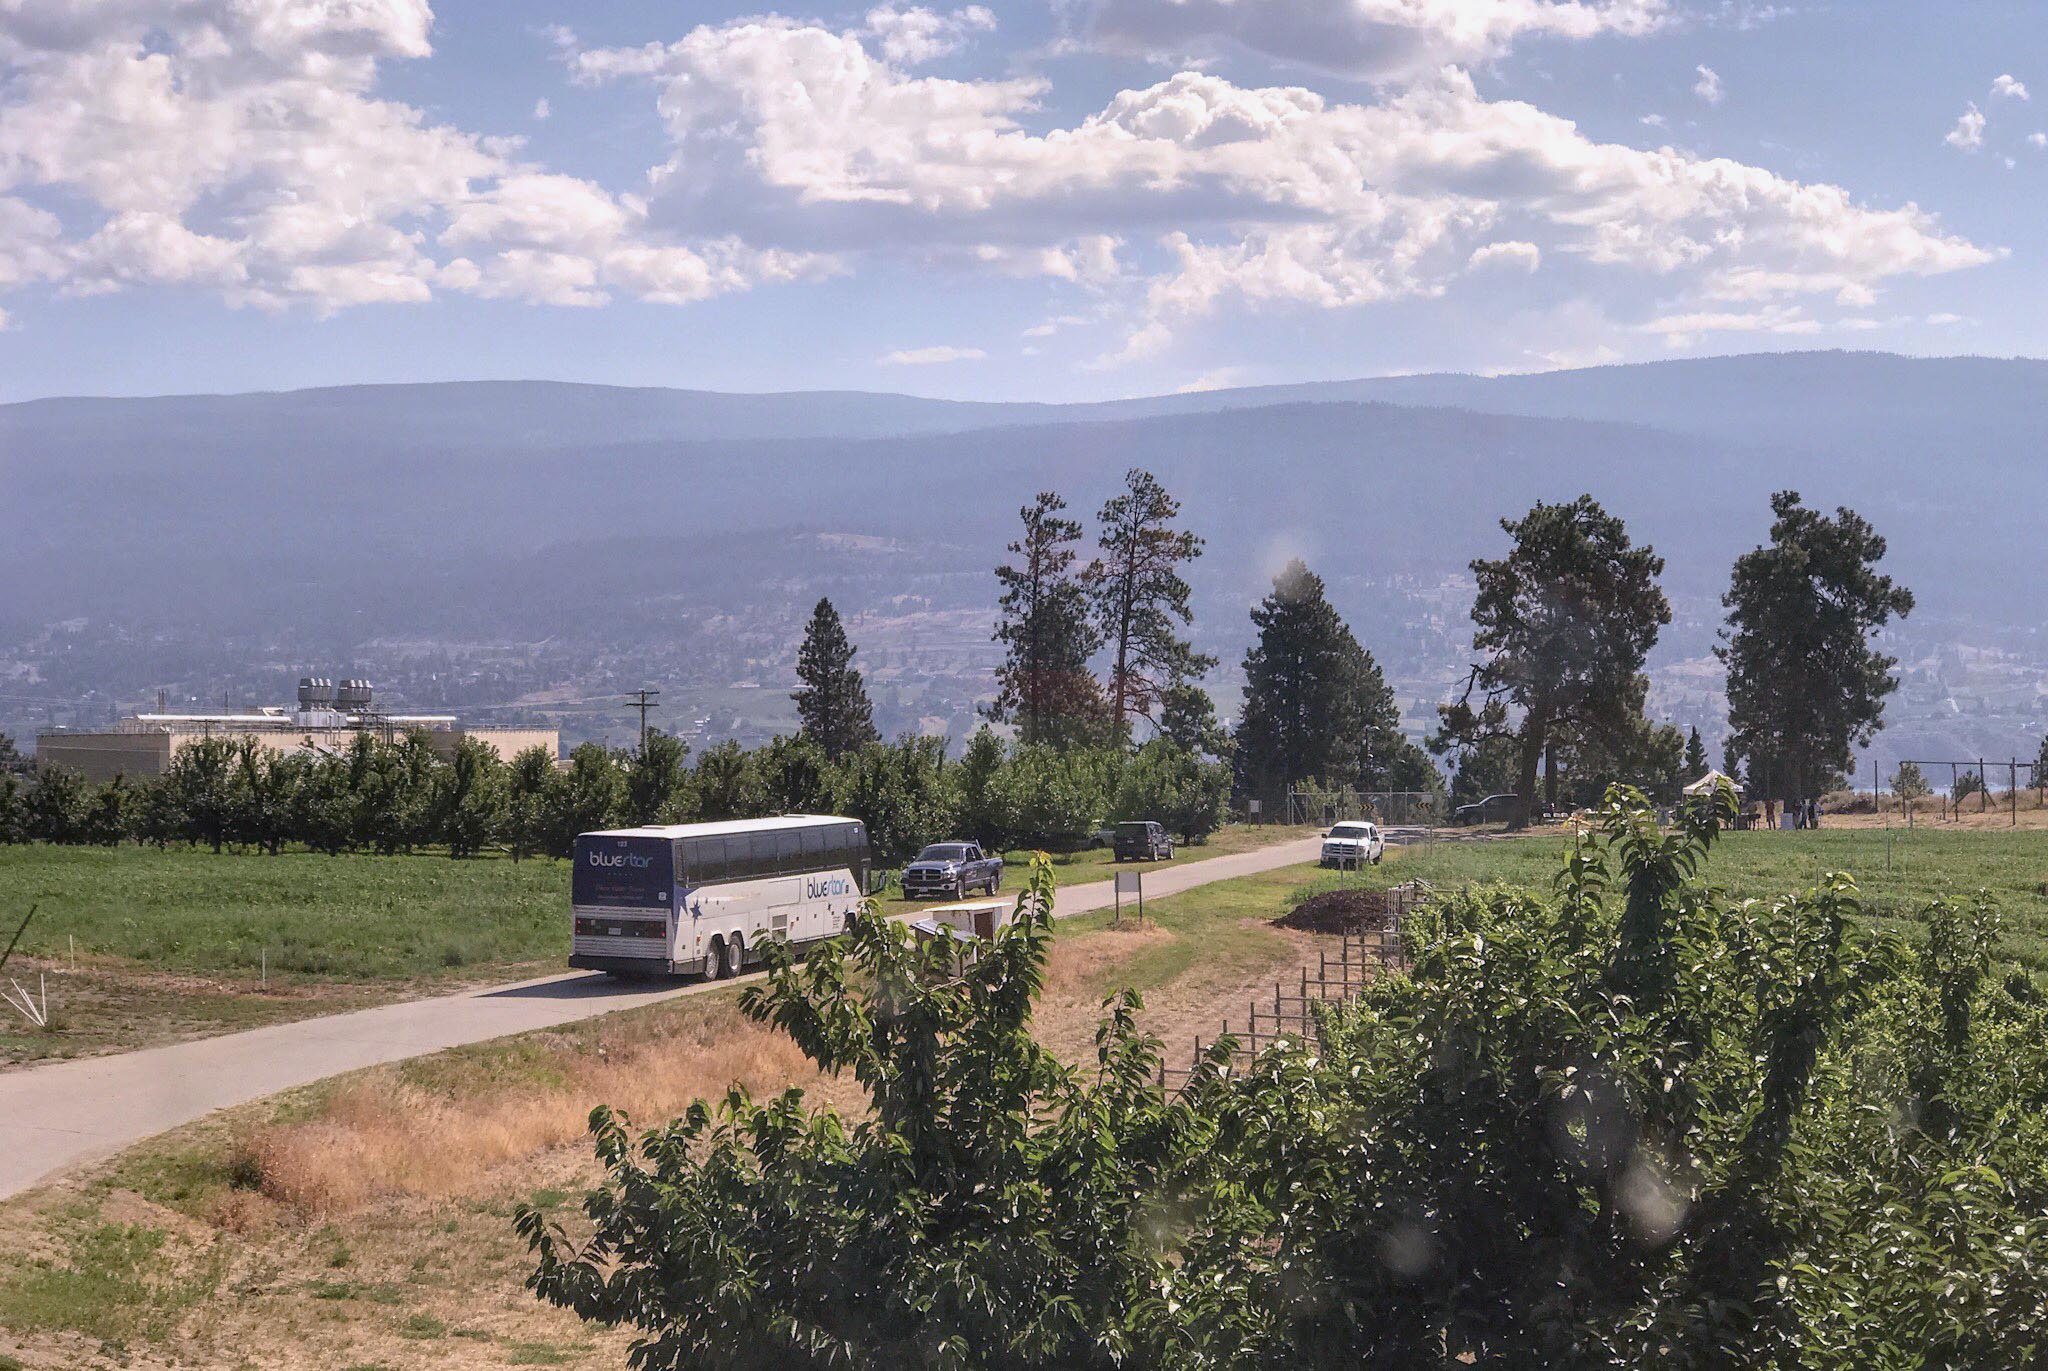 The view of the Summerland Research and Development Center, (left) and Okanagan River Valley on July 23, 2018 during the IFTA Summer Tour. <b>(TJ Mullinax/Good Fruit Grower)</b>